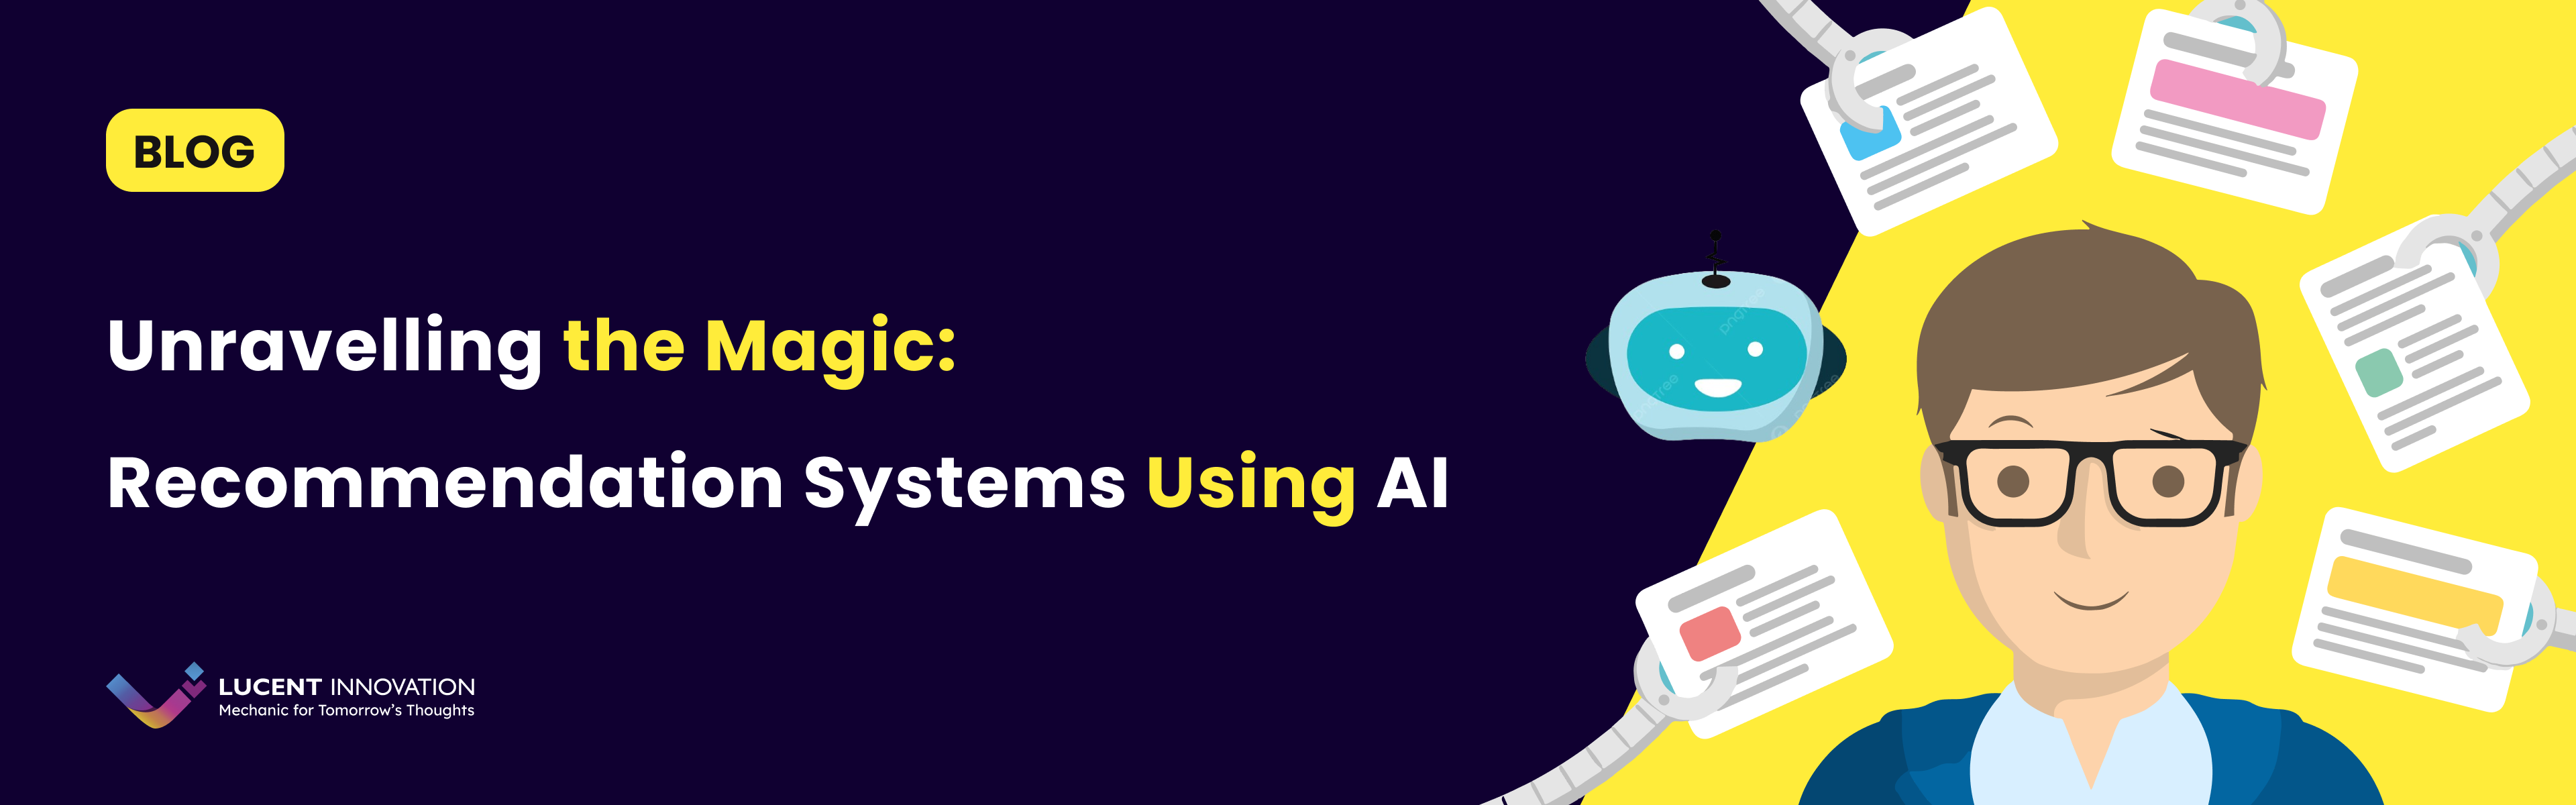 Understanding and Implementing the Magic of AI Recommendation Systems